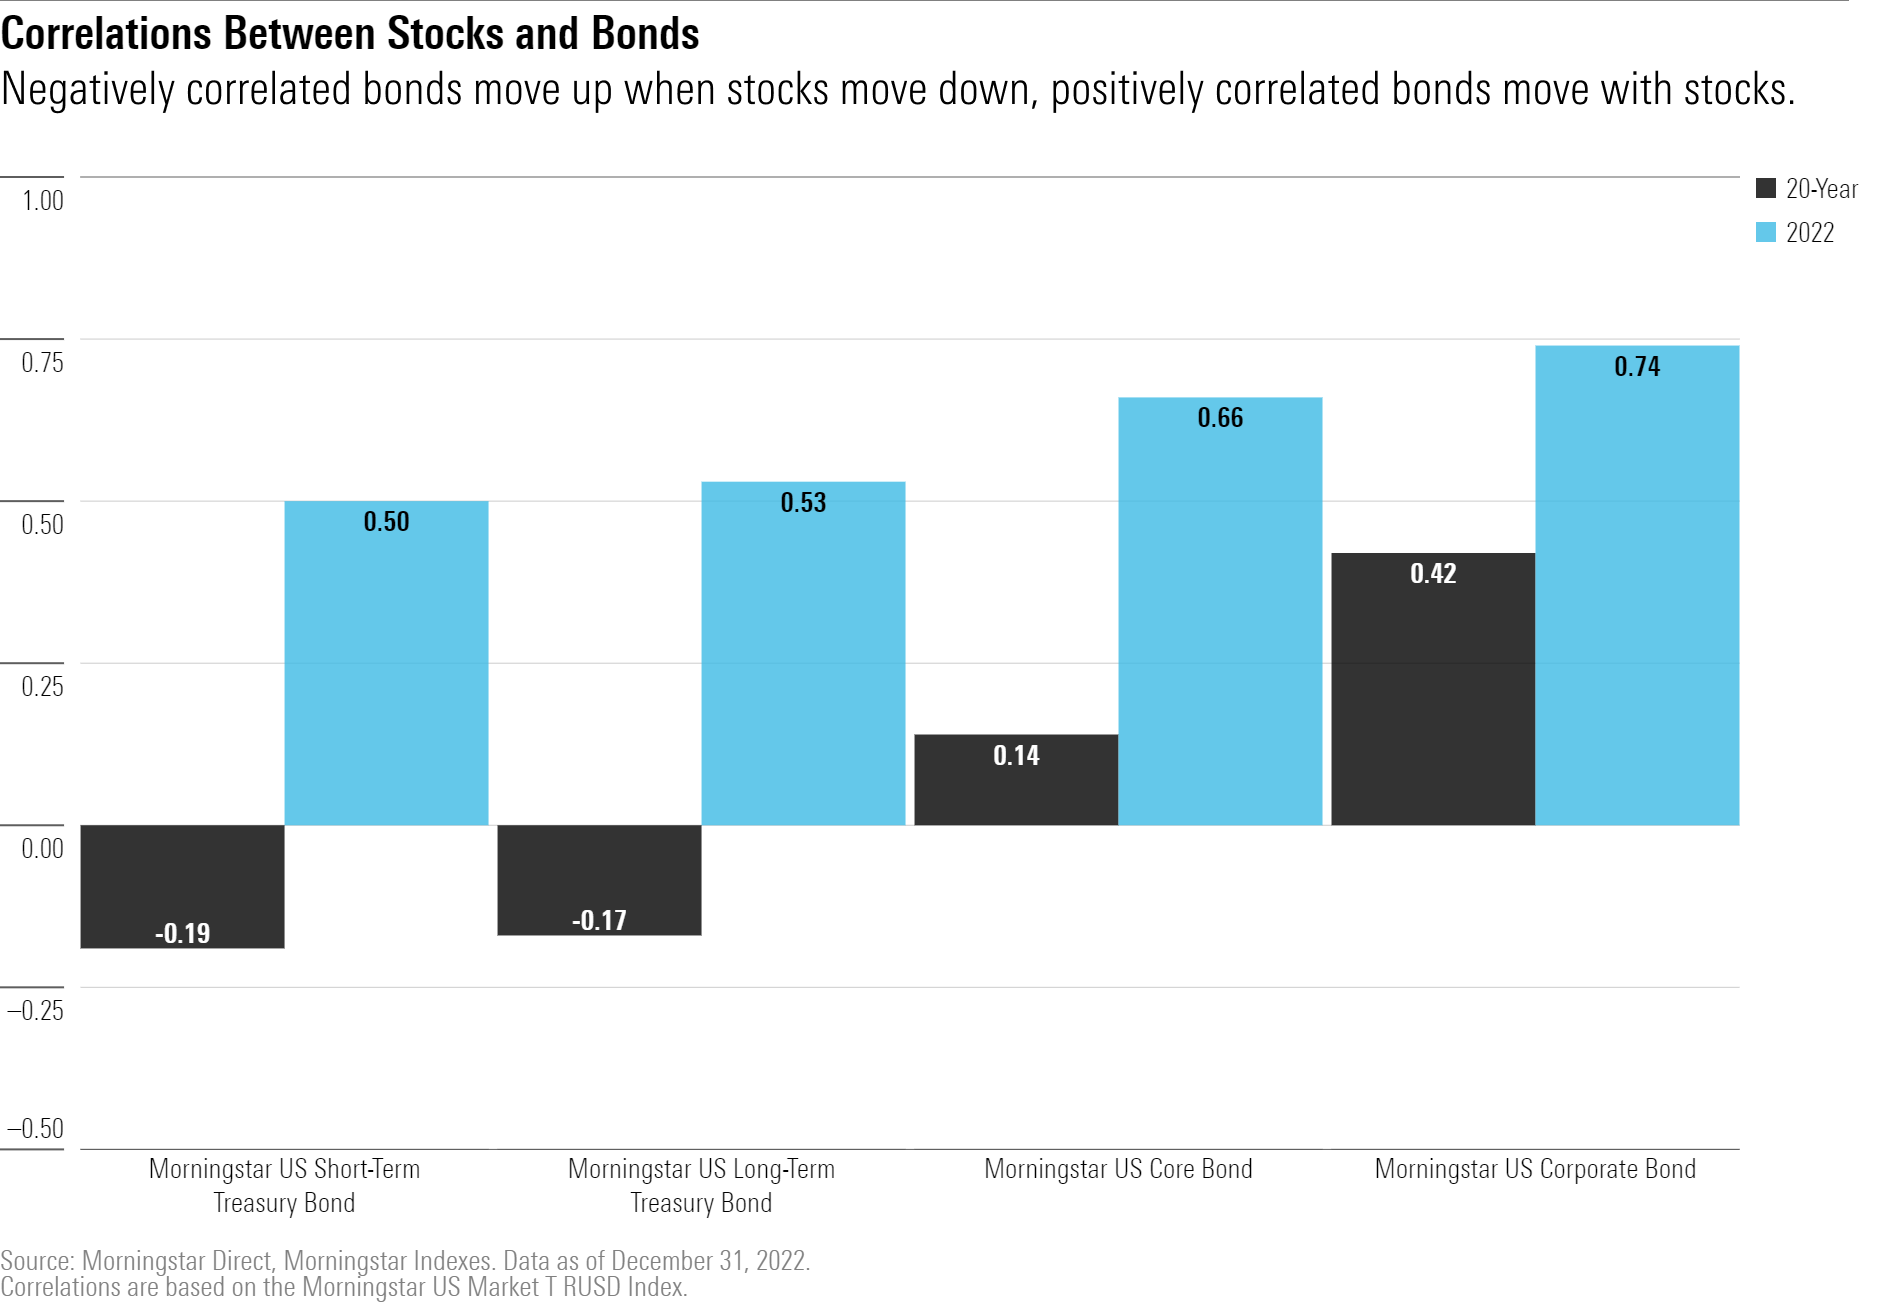 Negatively correlated bonds move up when stocks move down, positively correlated bonds move with stocks.